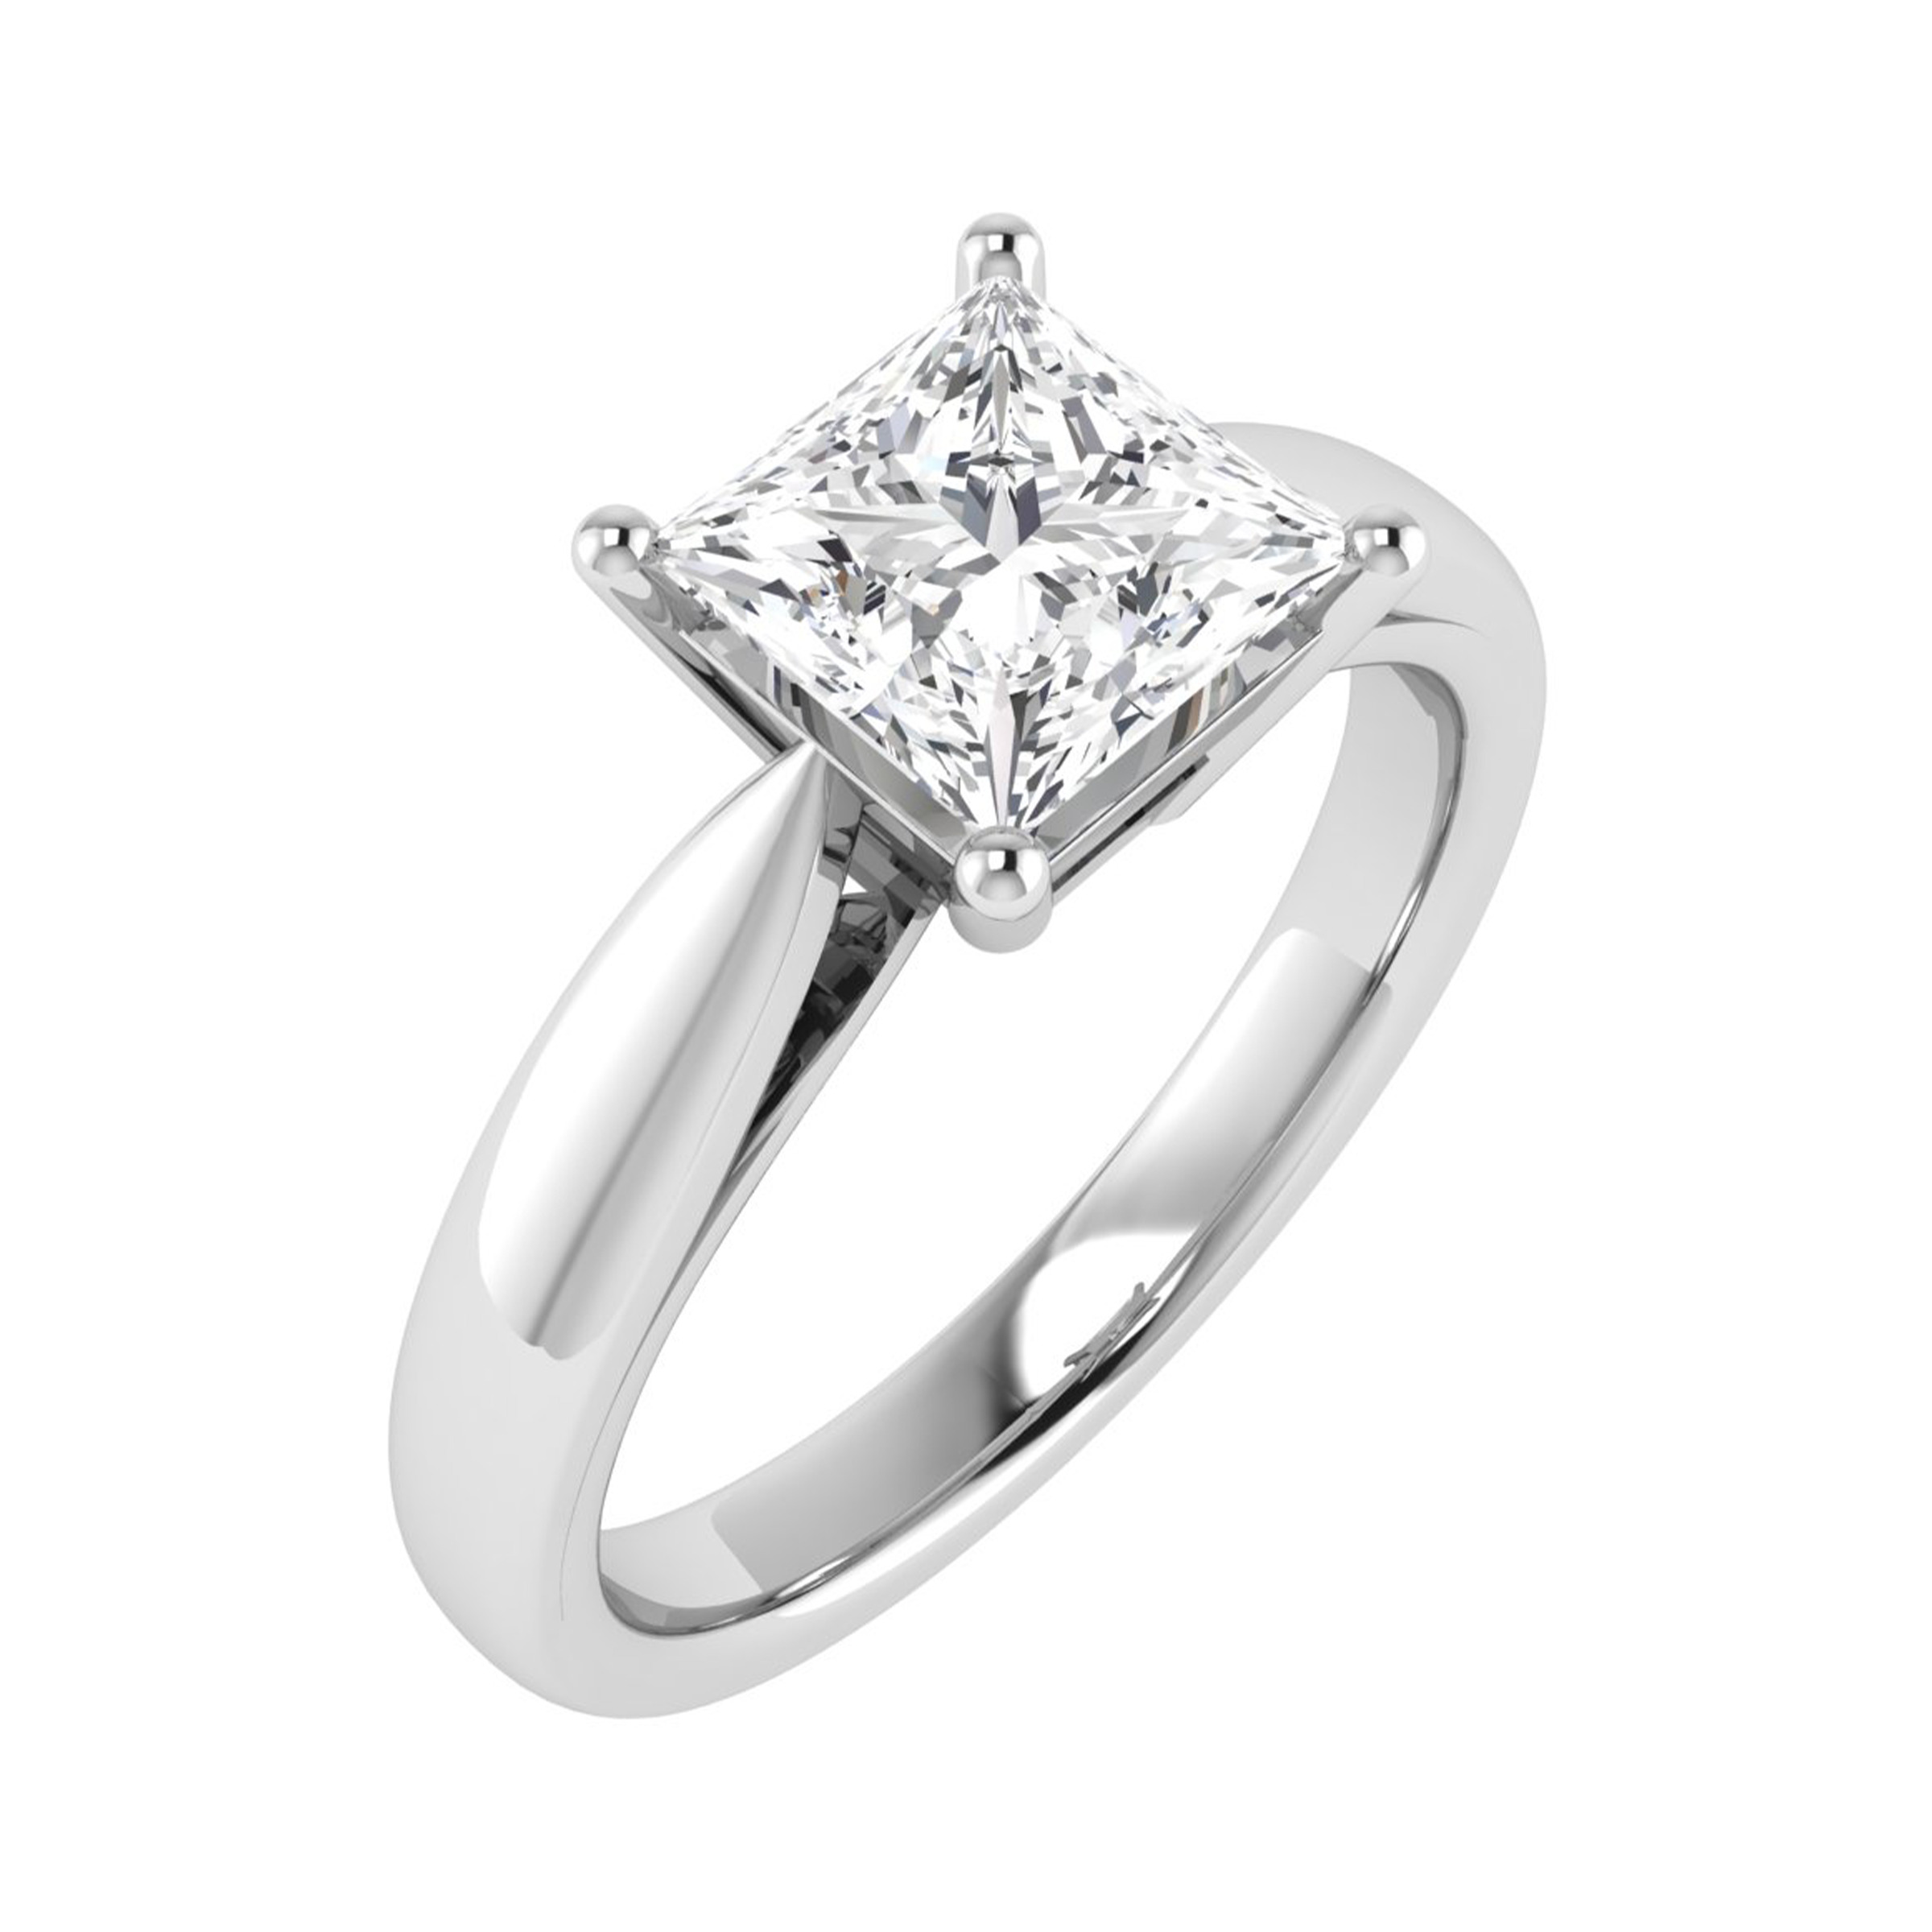 Princess Cut V Setting 4 Claw Solitaire Engagement Ring